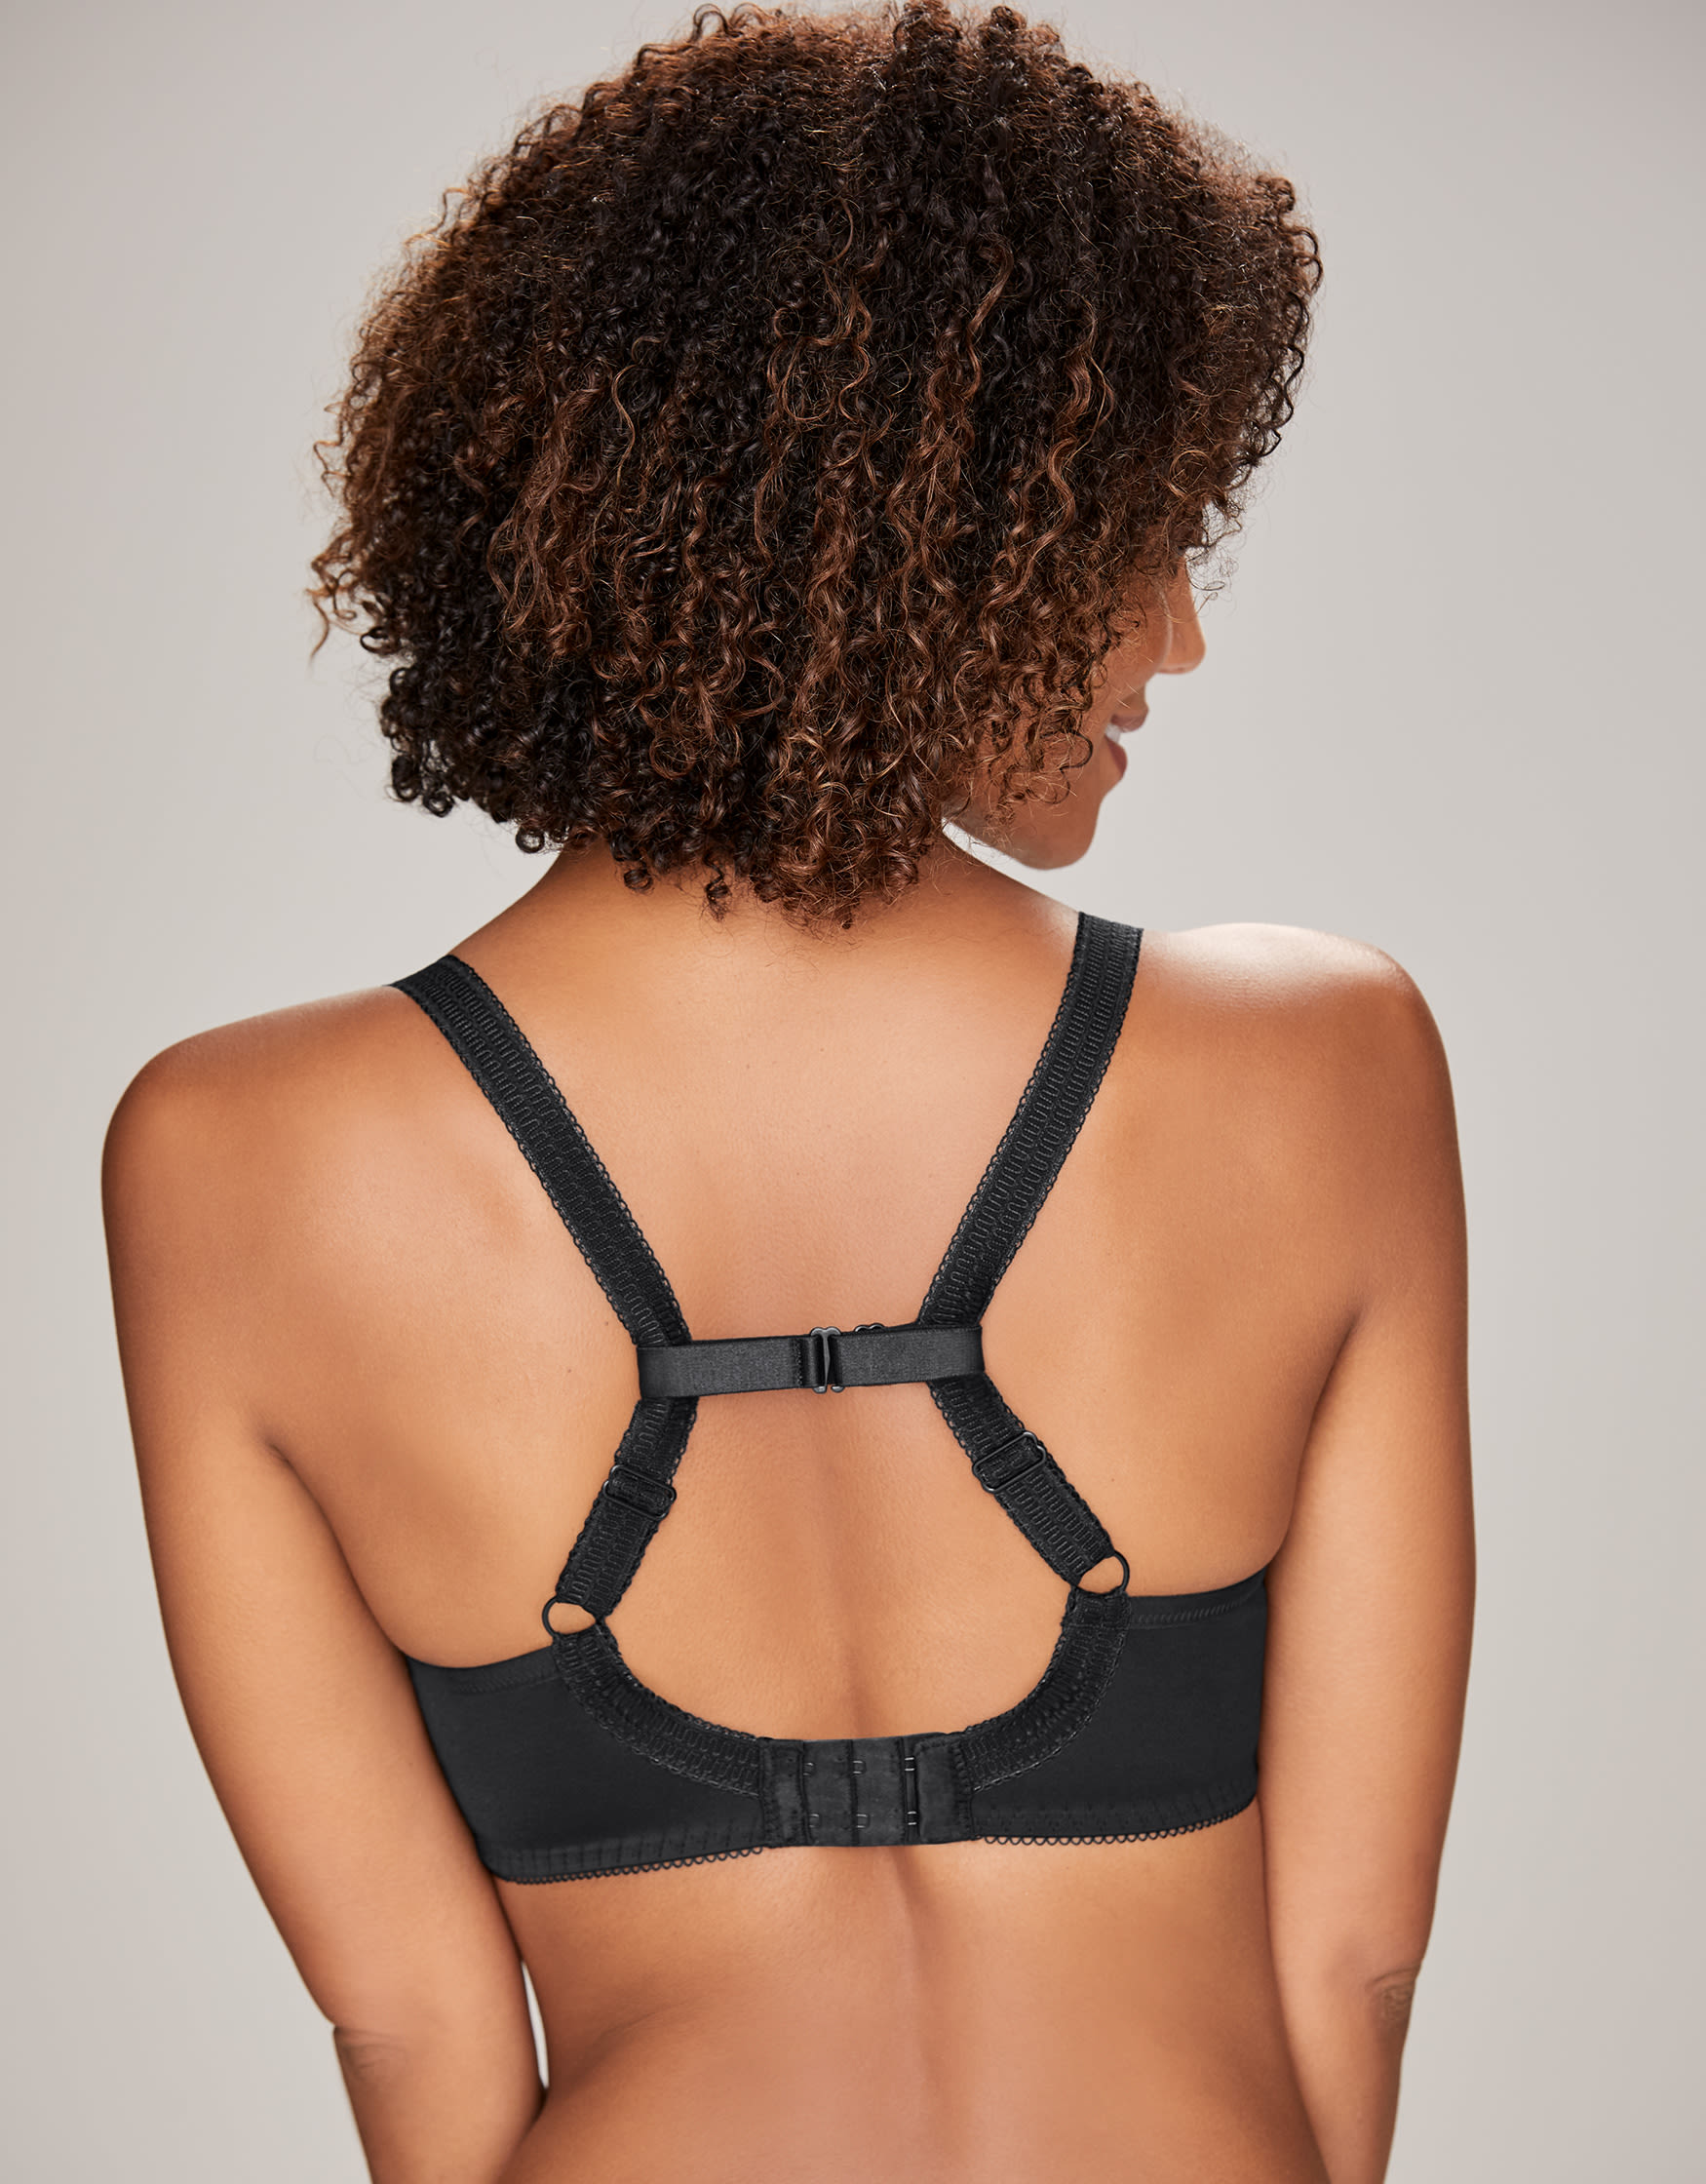 This Strappy Sports Bra is A Game-Changer for Small Boobs